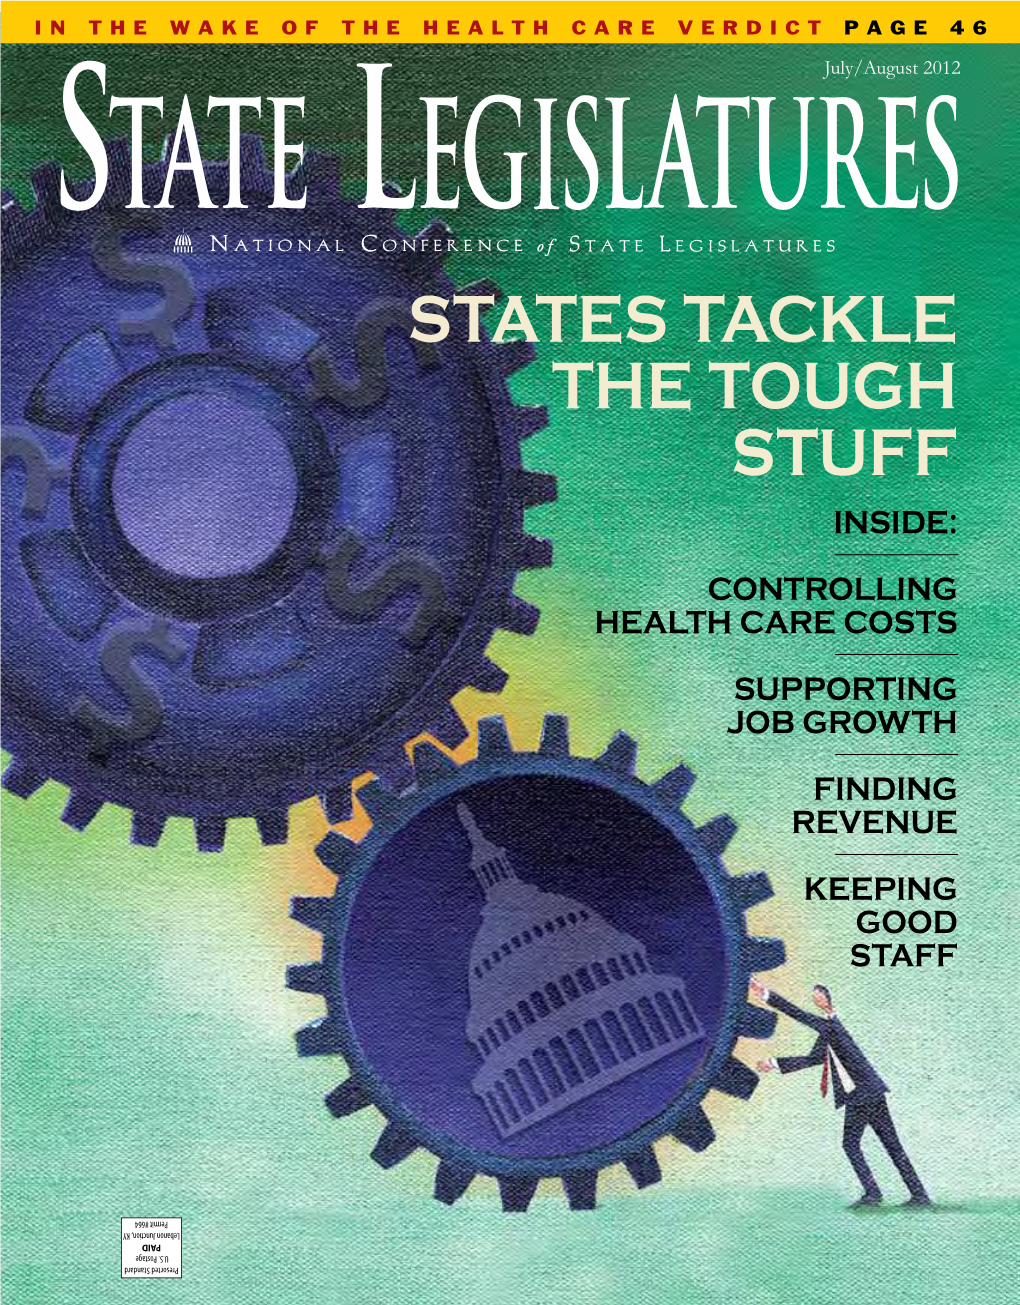 States Tackle the Tough Stuff Inside: Controlling Health Care Costs